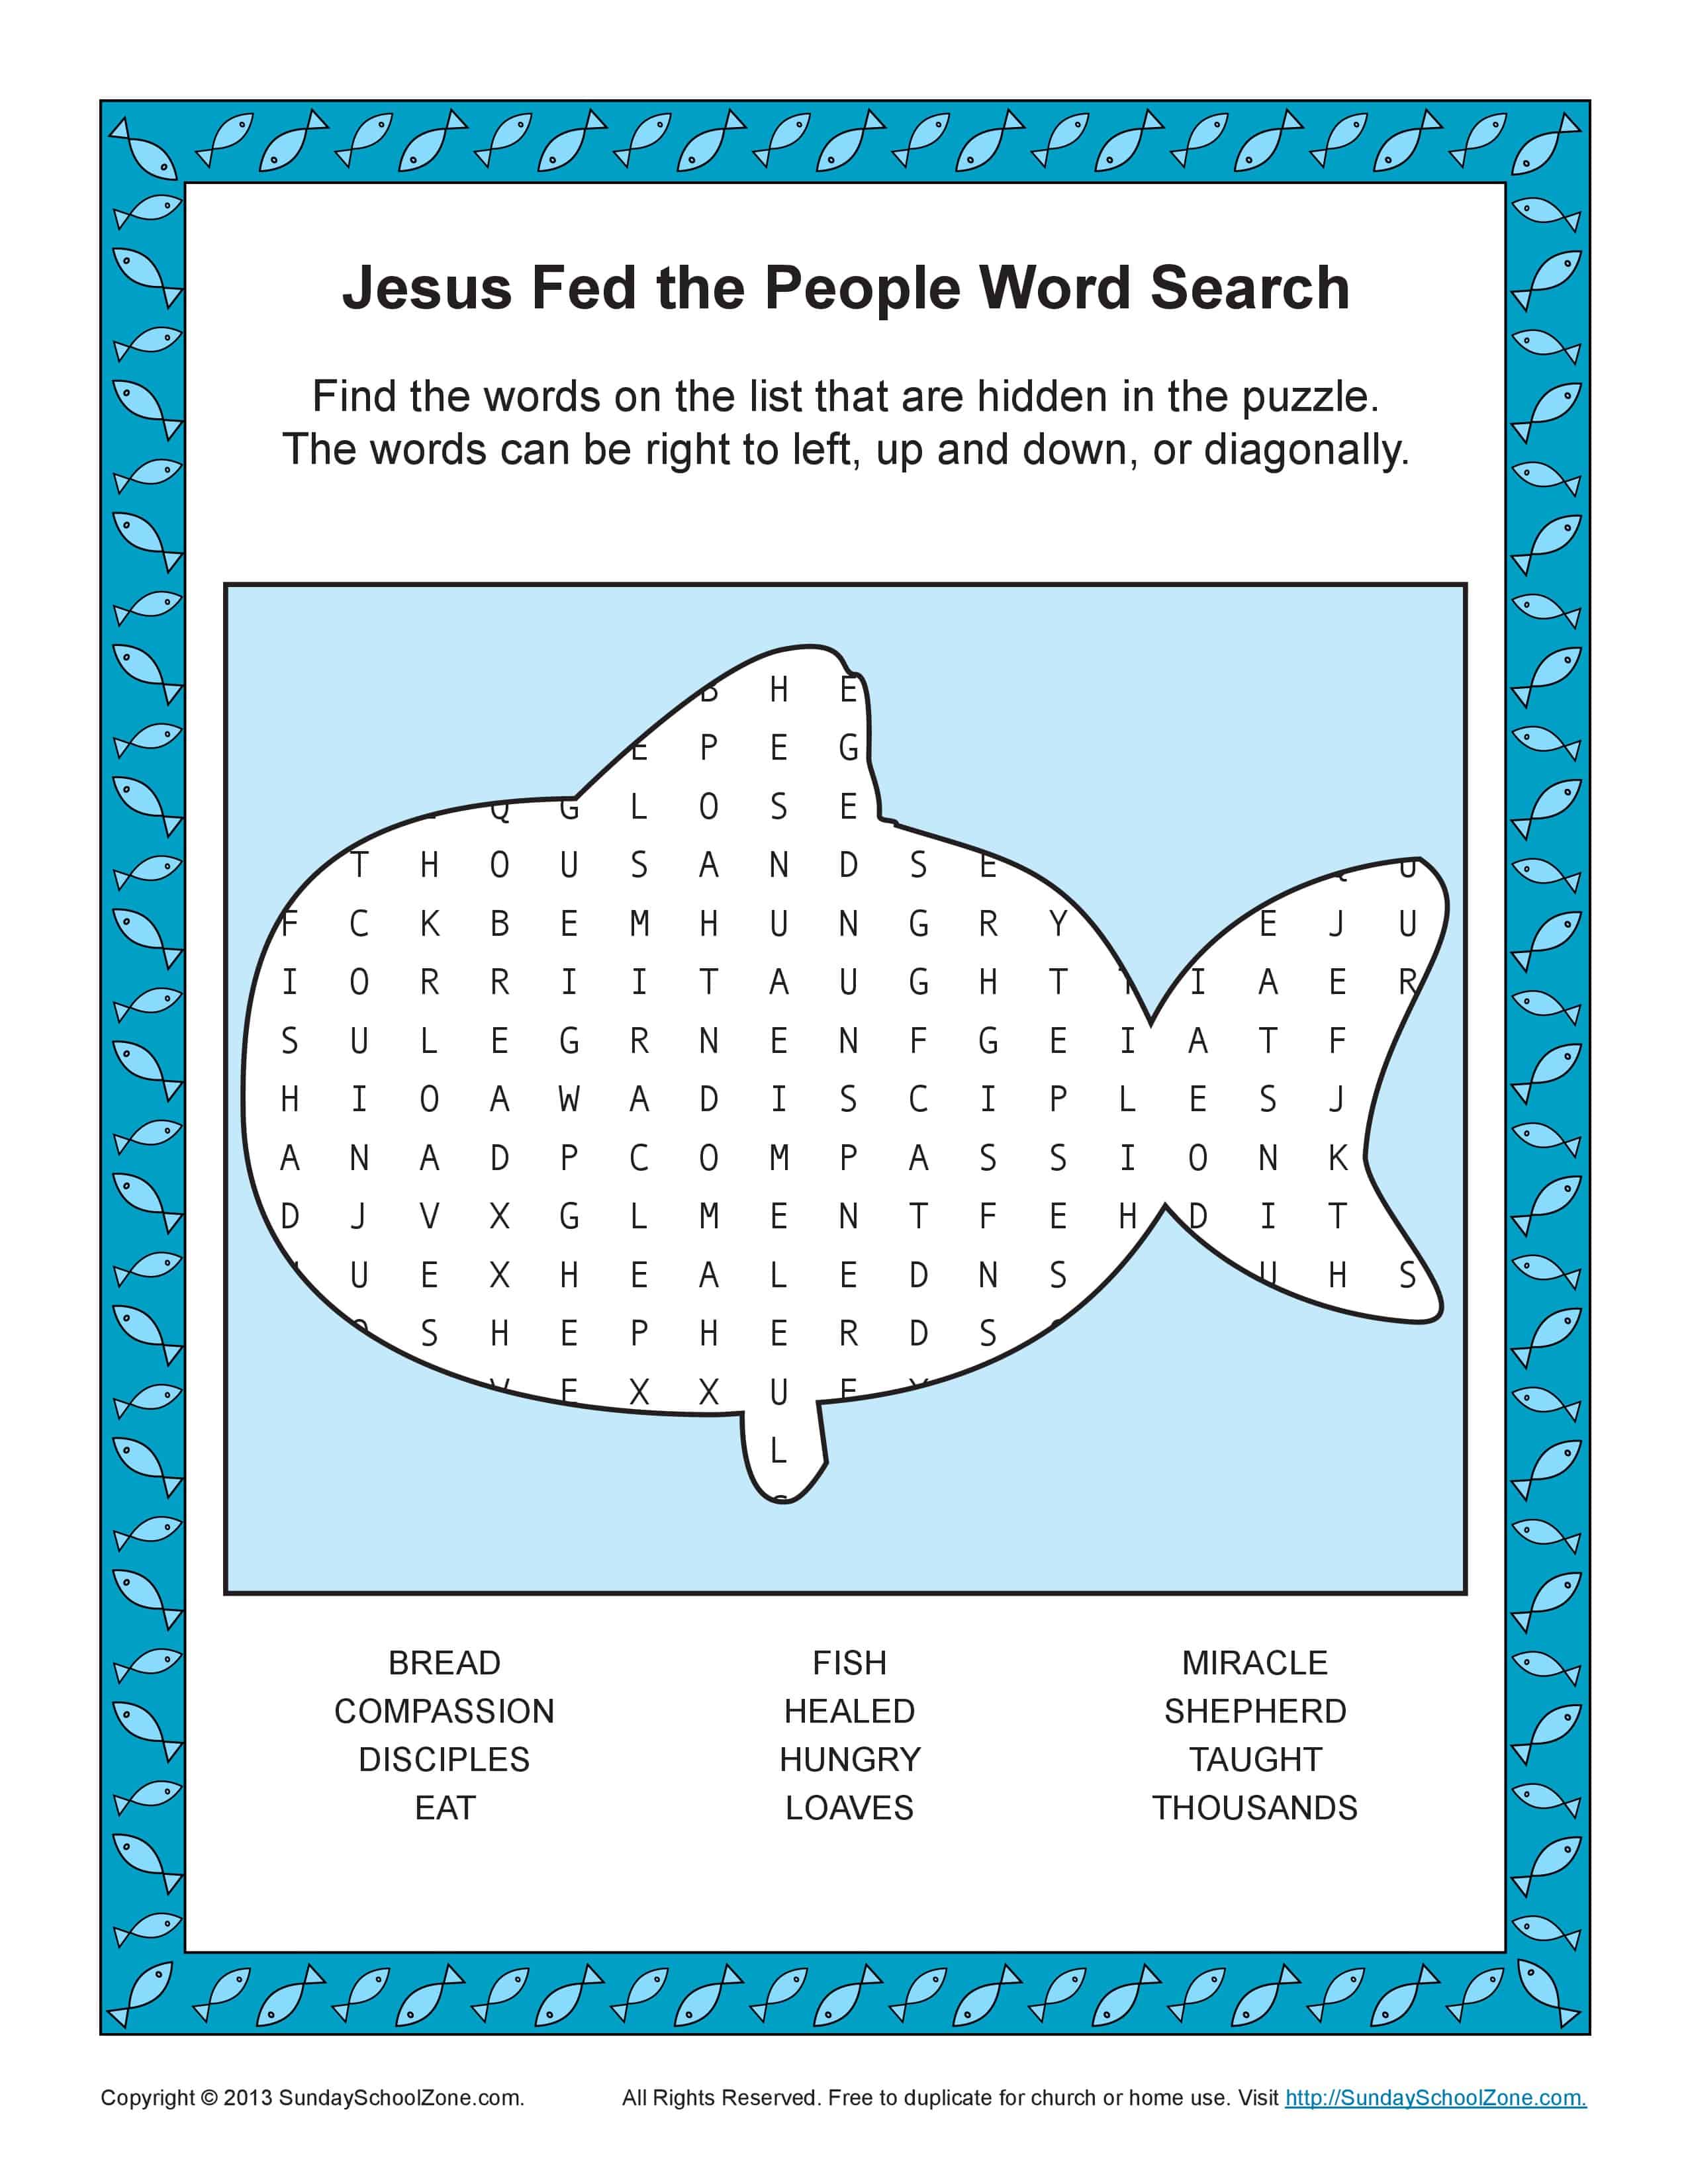 Free, Printable Bible Word Search Activities on Sunday School Zone